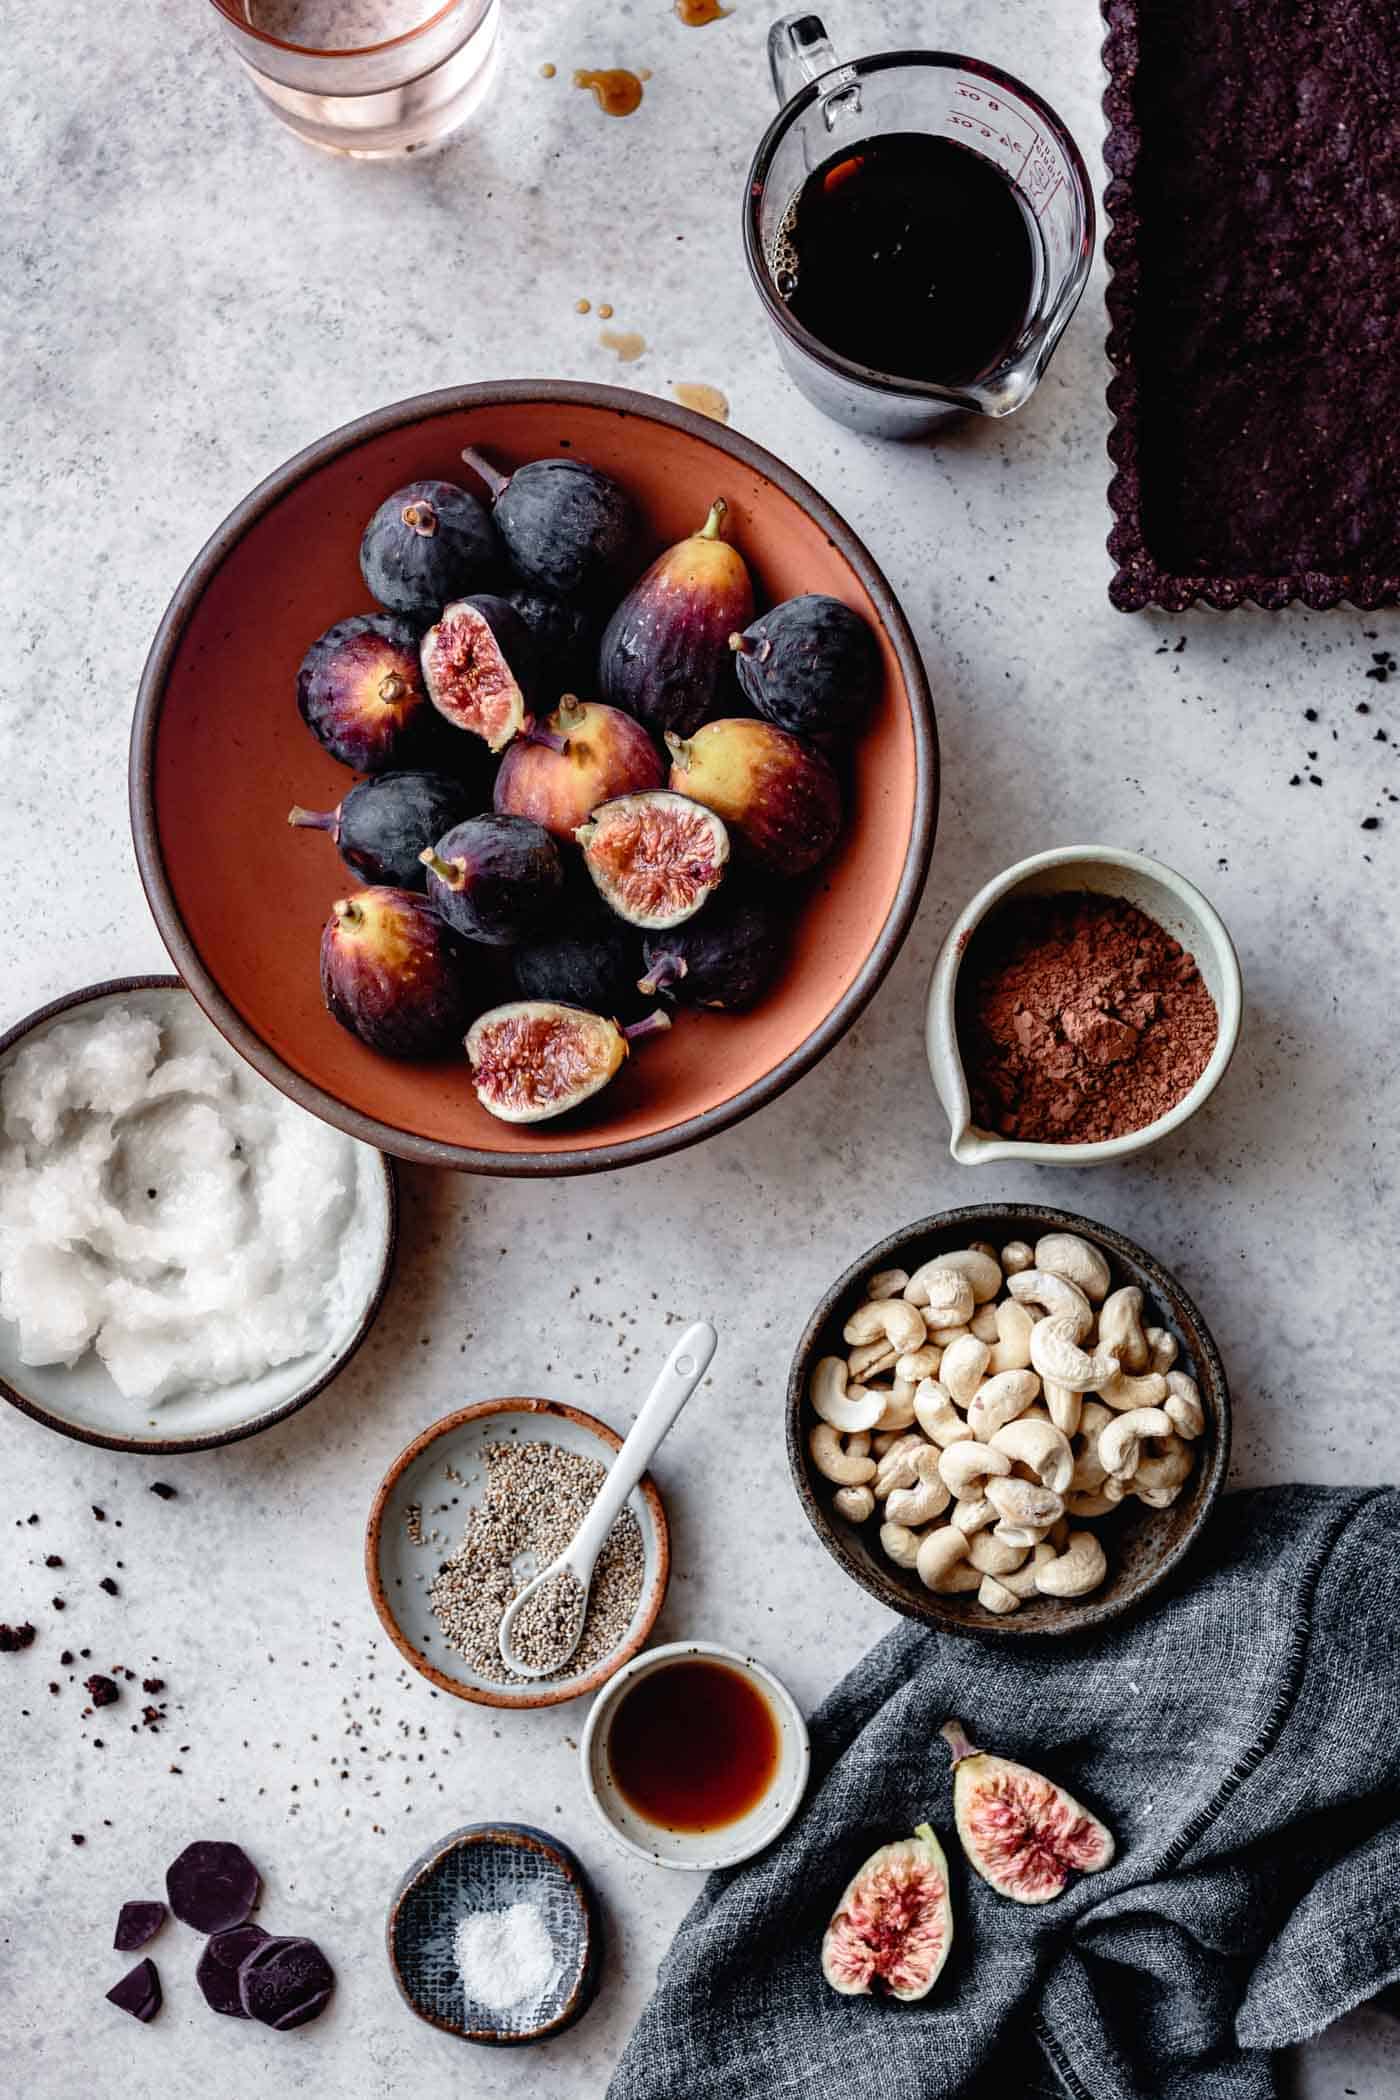 Ingredients for chocolate fig tart recipe